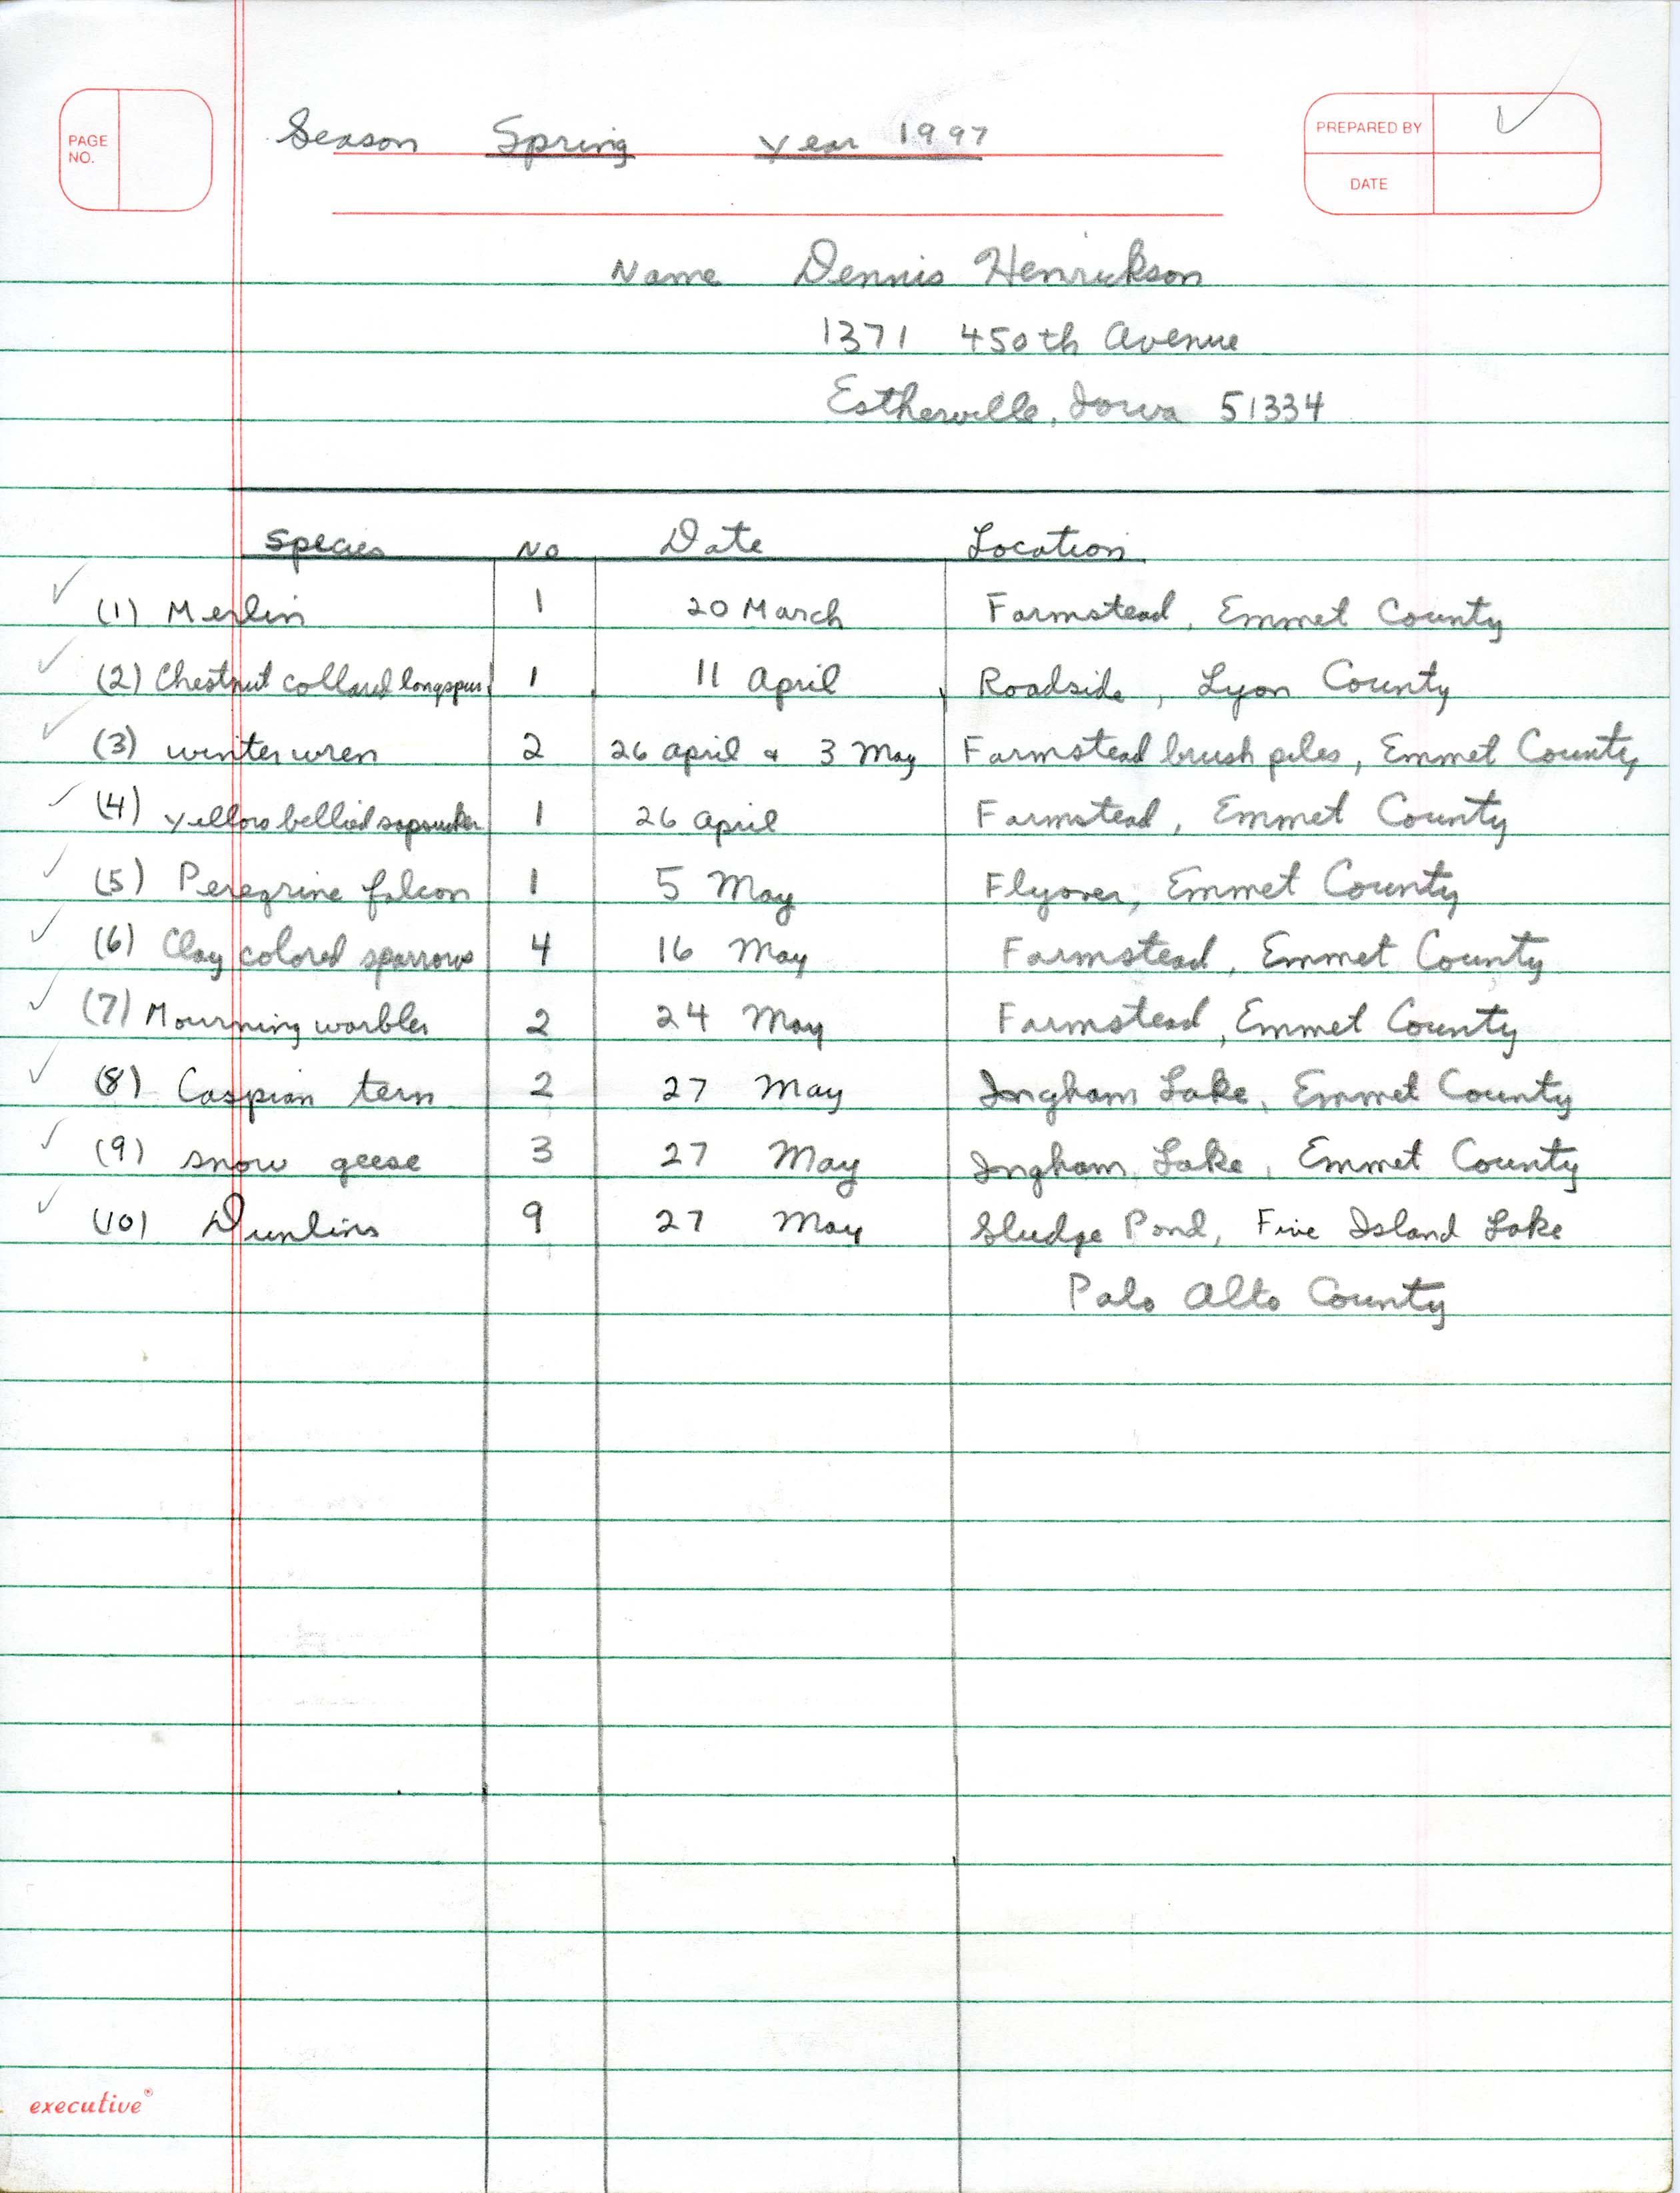 Field notes contributed by Dennis Henrickson, spring 1997